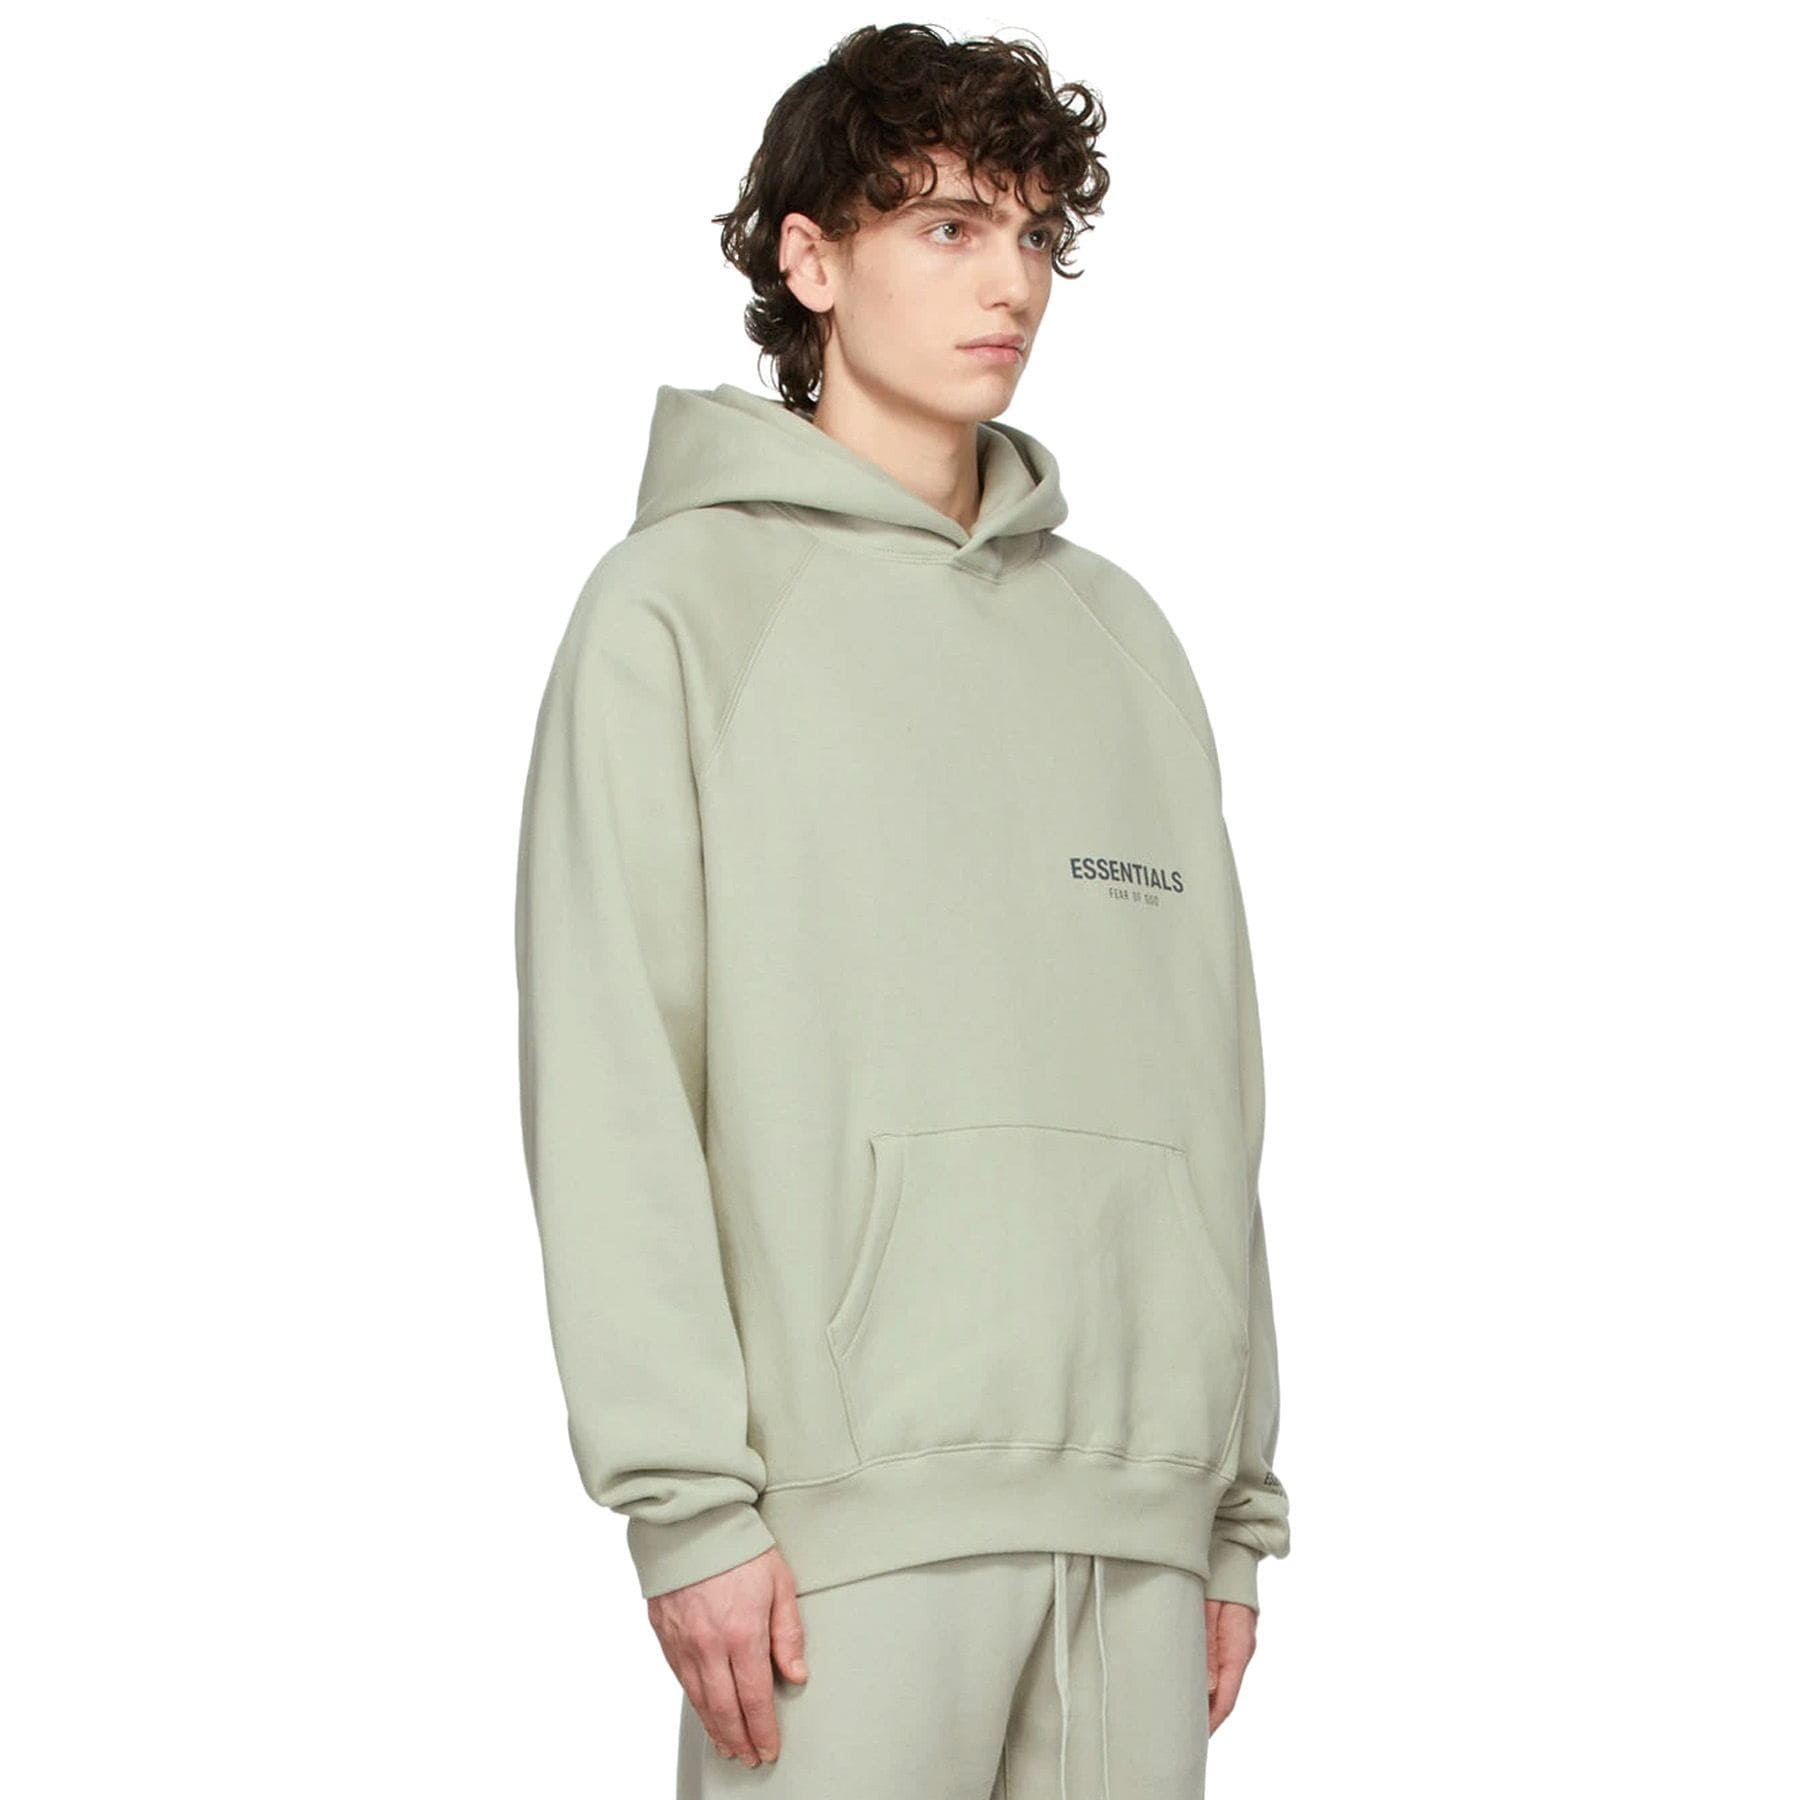 Double Boxed hoodie 159.99 FEAR OF GOD ESSENTIALS CORE PULLOVER HOODIE CONCRETE Double Boxed